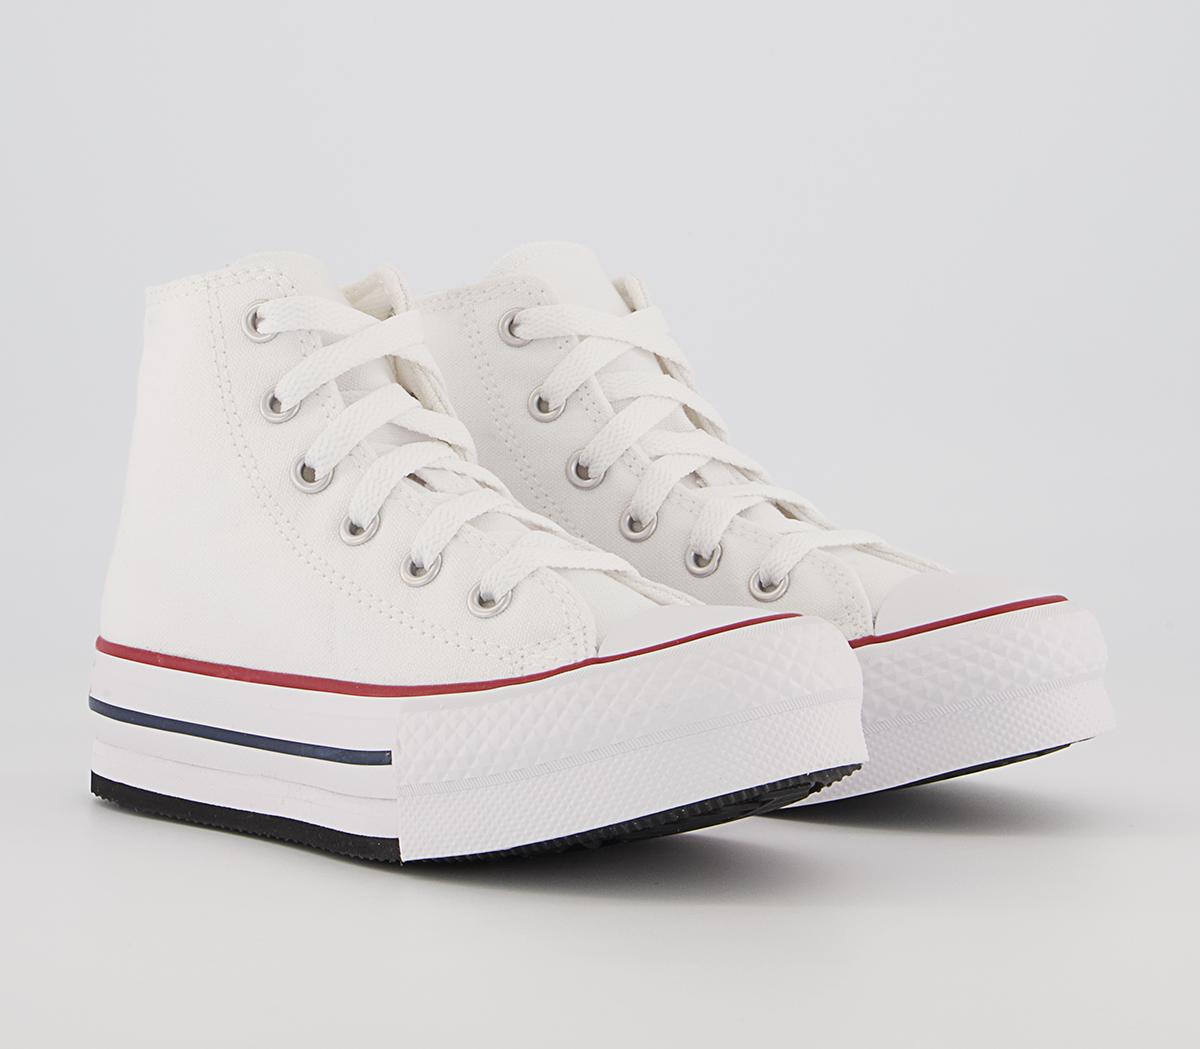 Converse Kids All Star Eva Lift Hi Trainers White Black Synthetic, 11 Youth